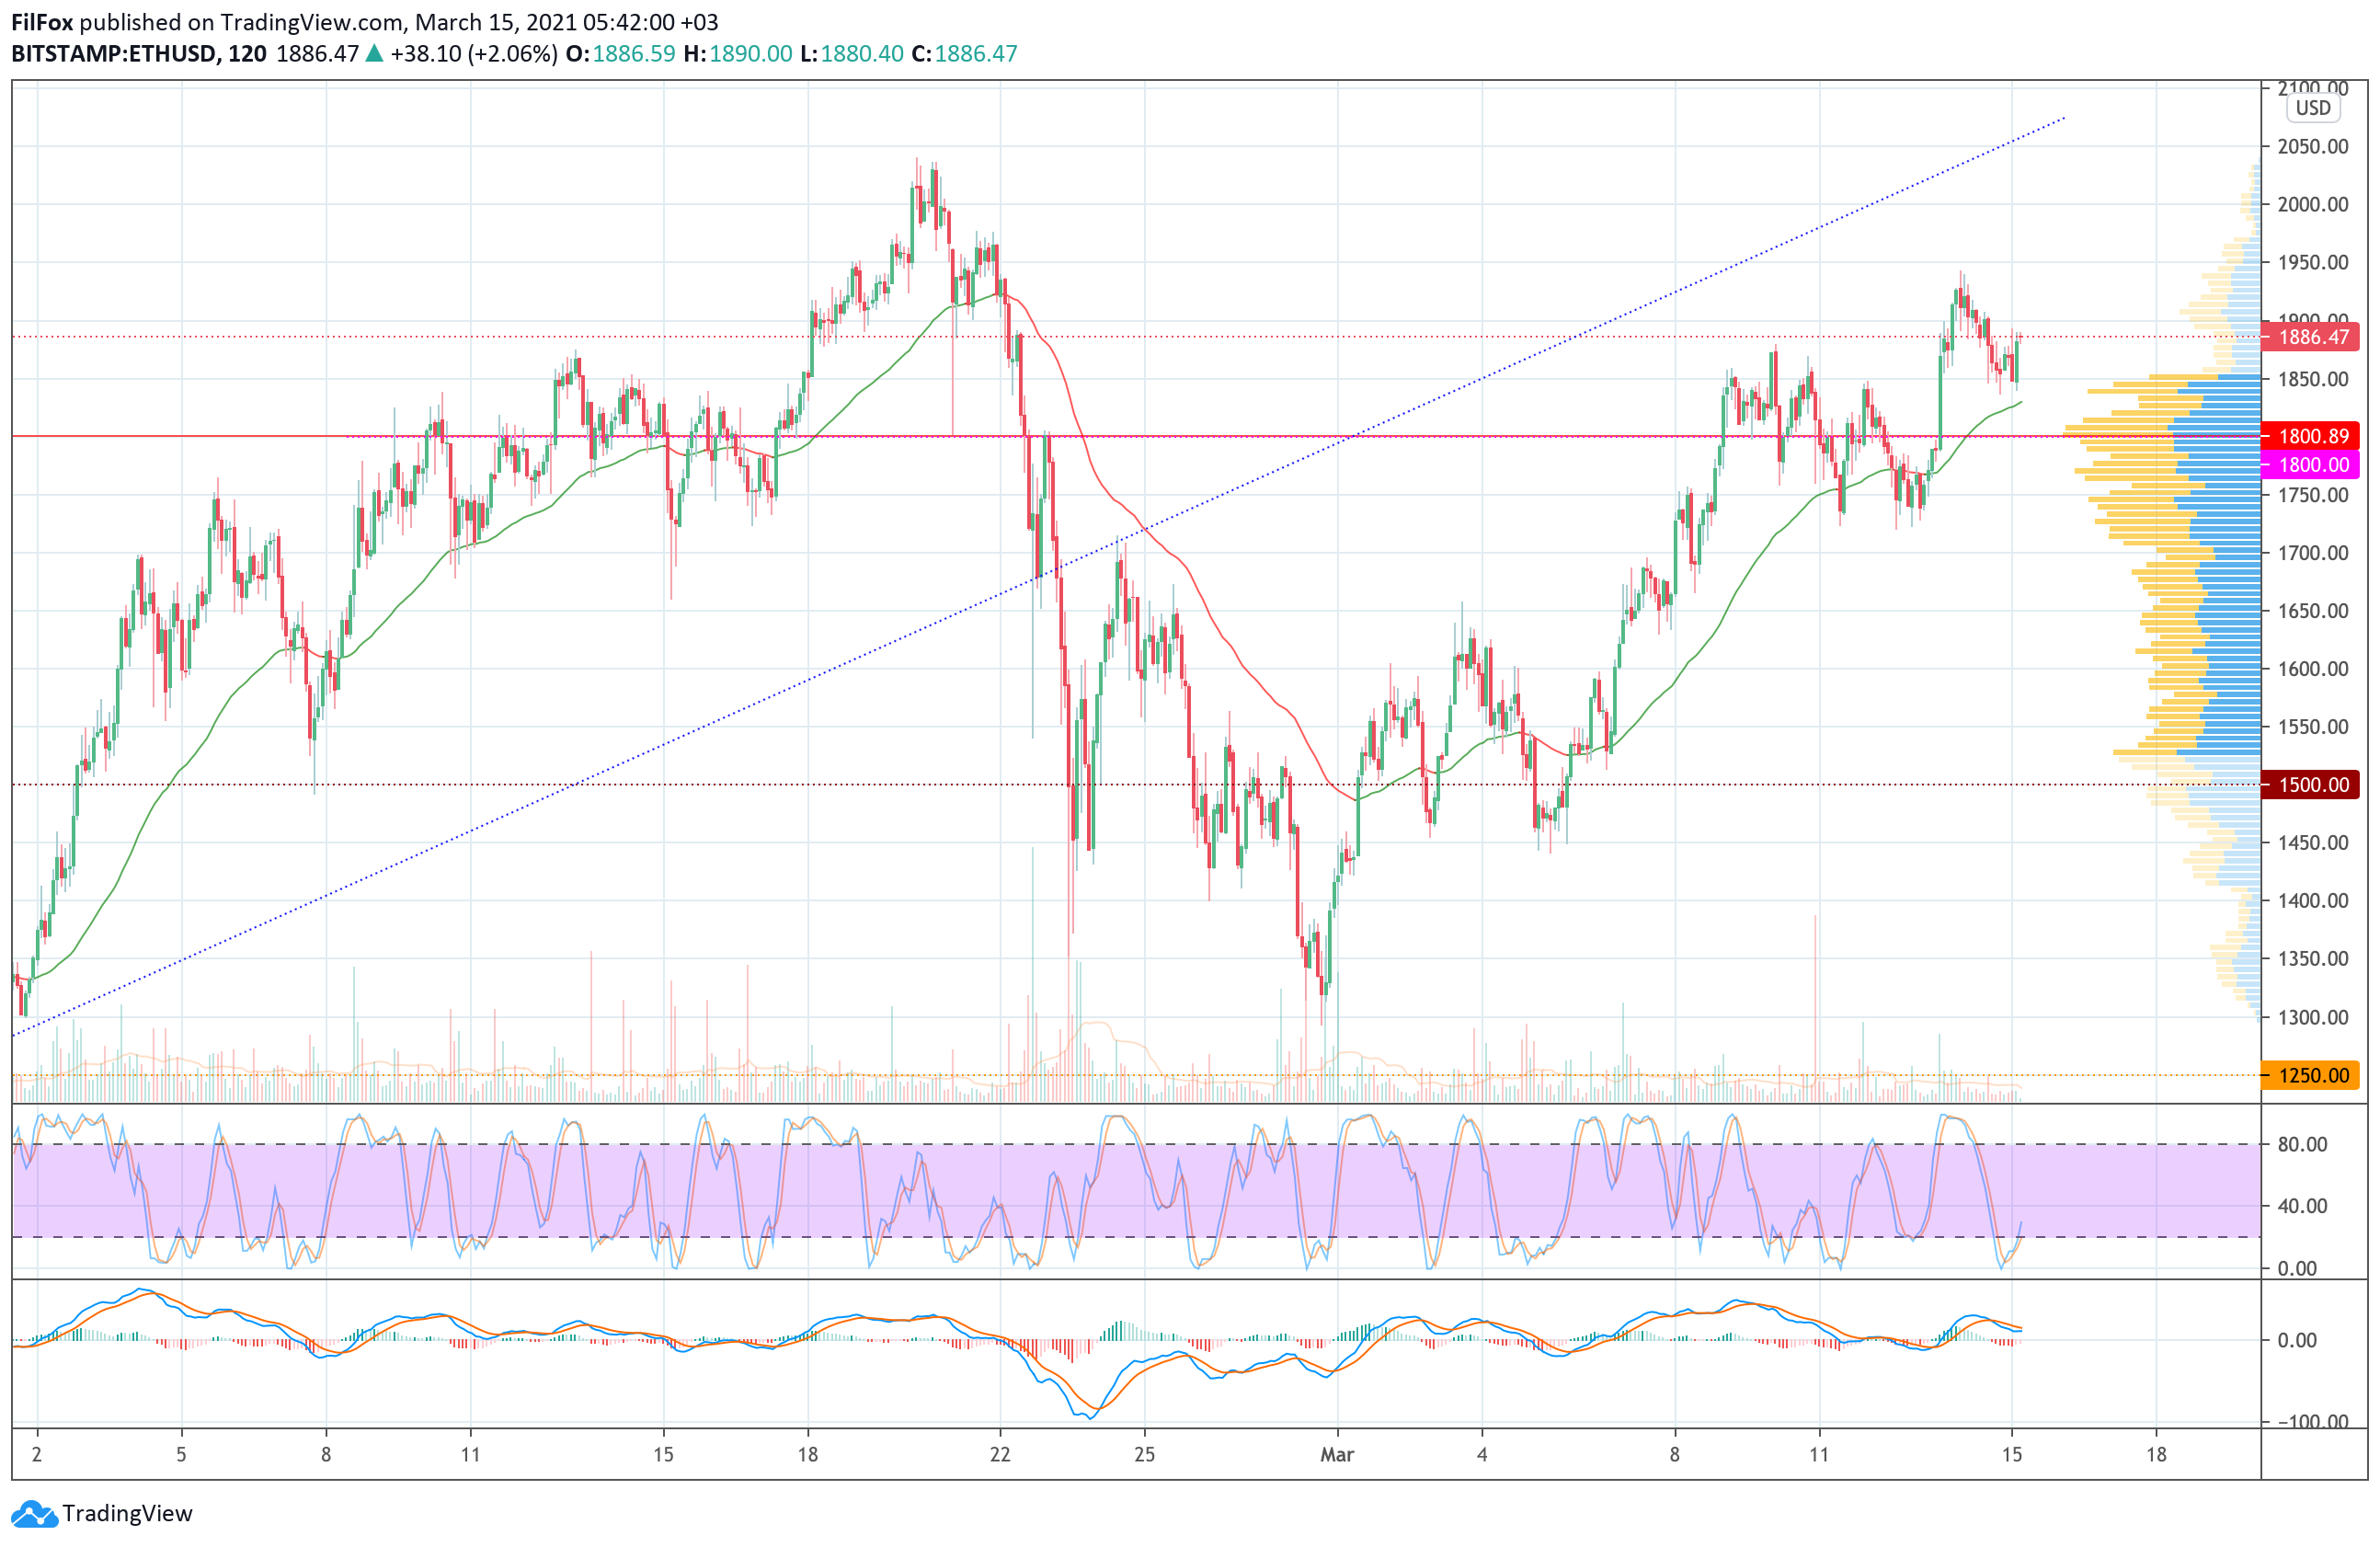 Analysis of the prices of Bitcoin, Ethereum, XRP for 03/15/2021